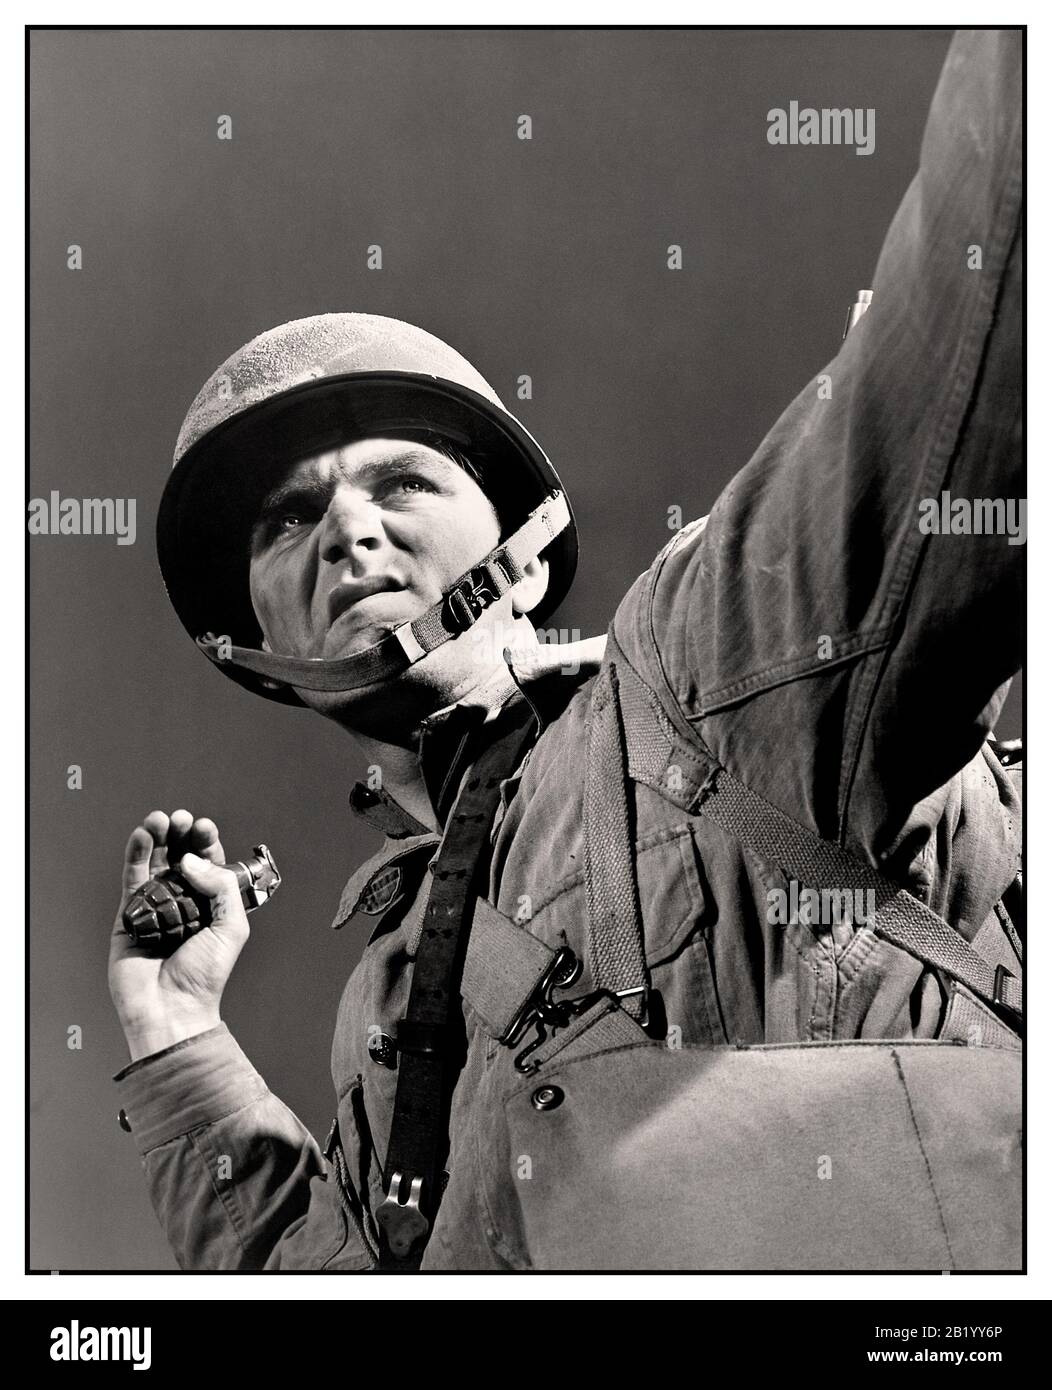 WW2 American Propaganda photo of an American GI infantryman army soldier about to throw a grenade, image titled 'A package for Hitler' Fort Belvoir, Virginia. Grenade thrower infantryman with look of determination on his face during training at Fort Belvoir, Virginia USA  preparing to throw his grenade. November 1942 Stock Photo